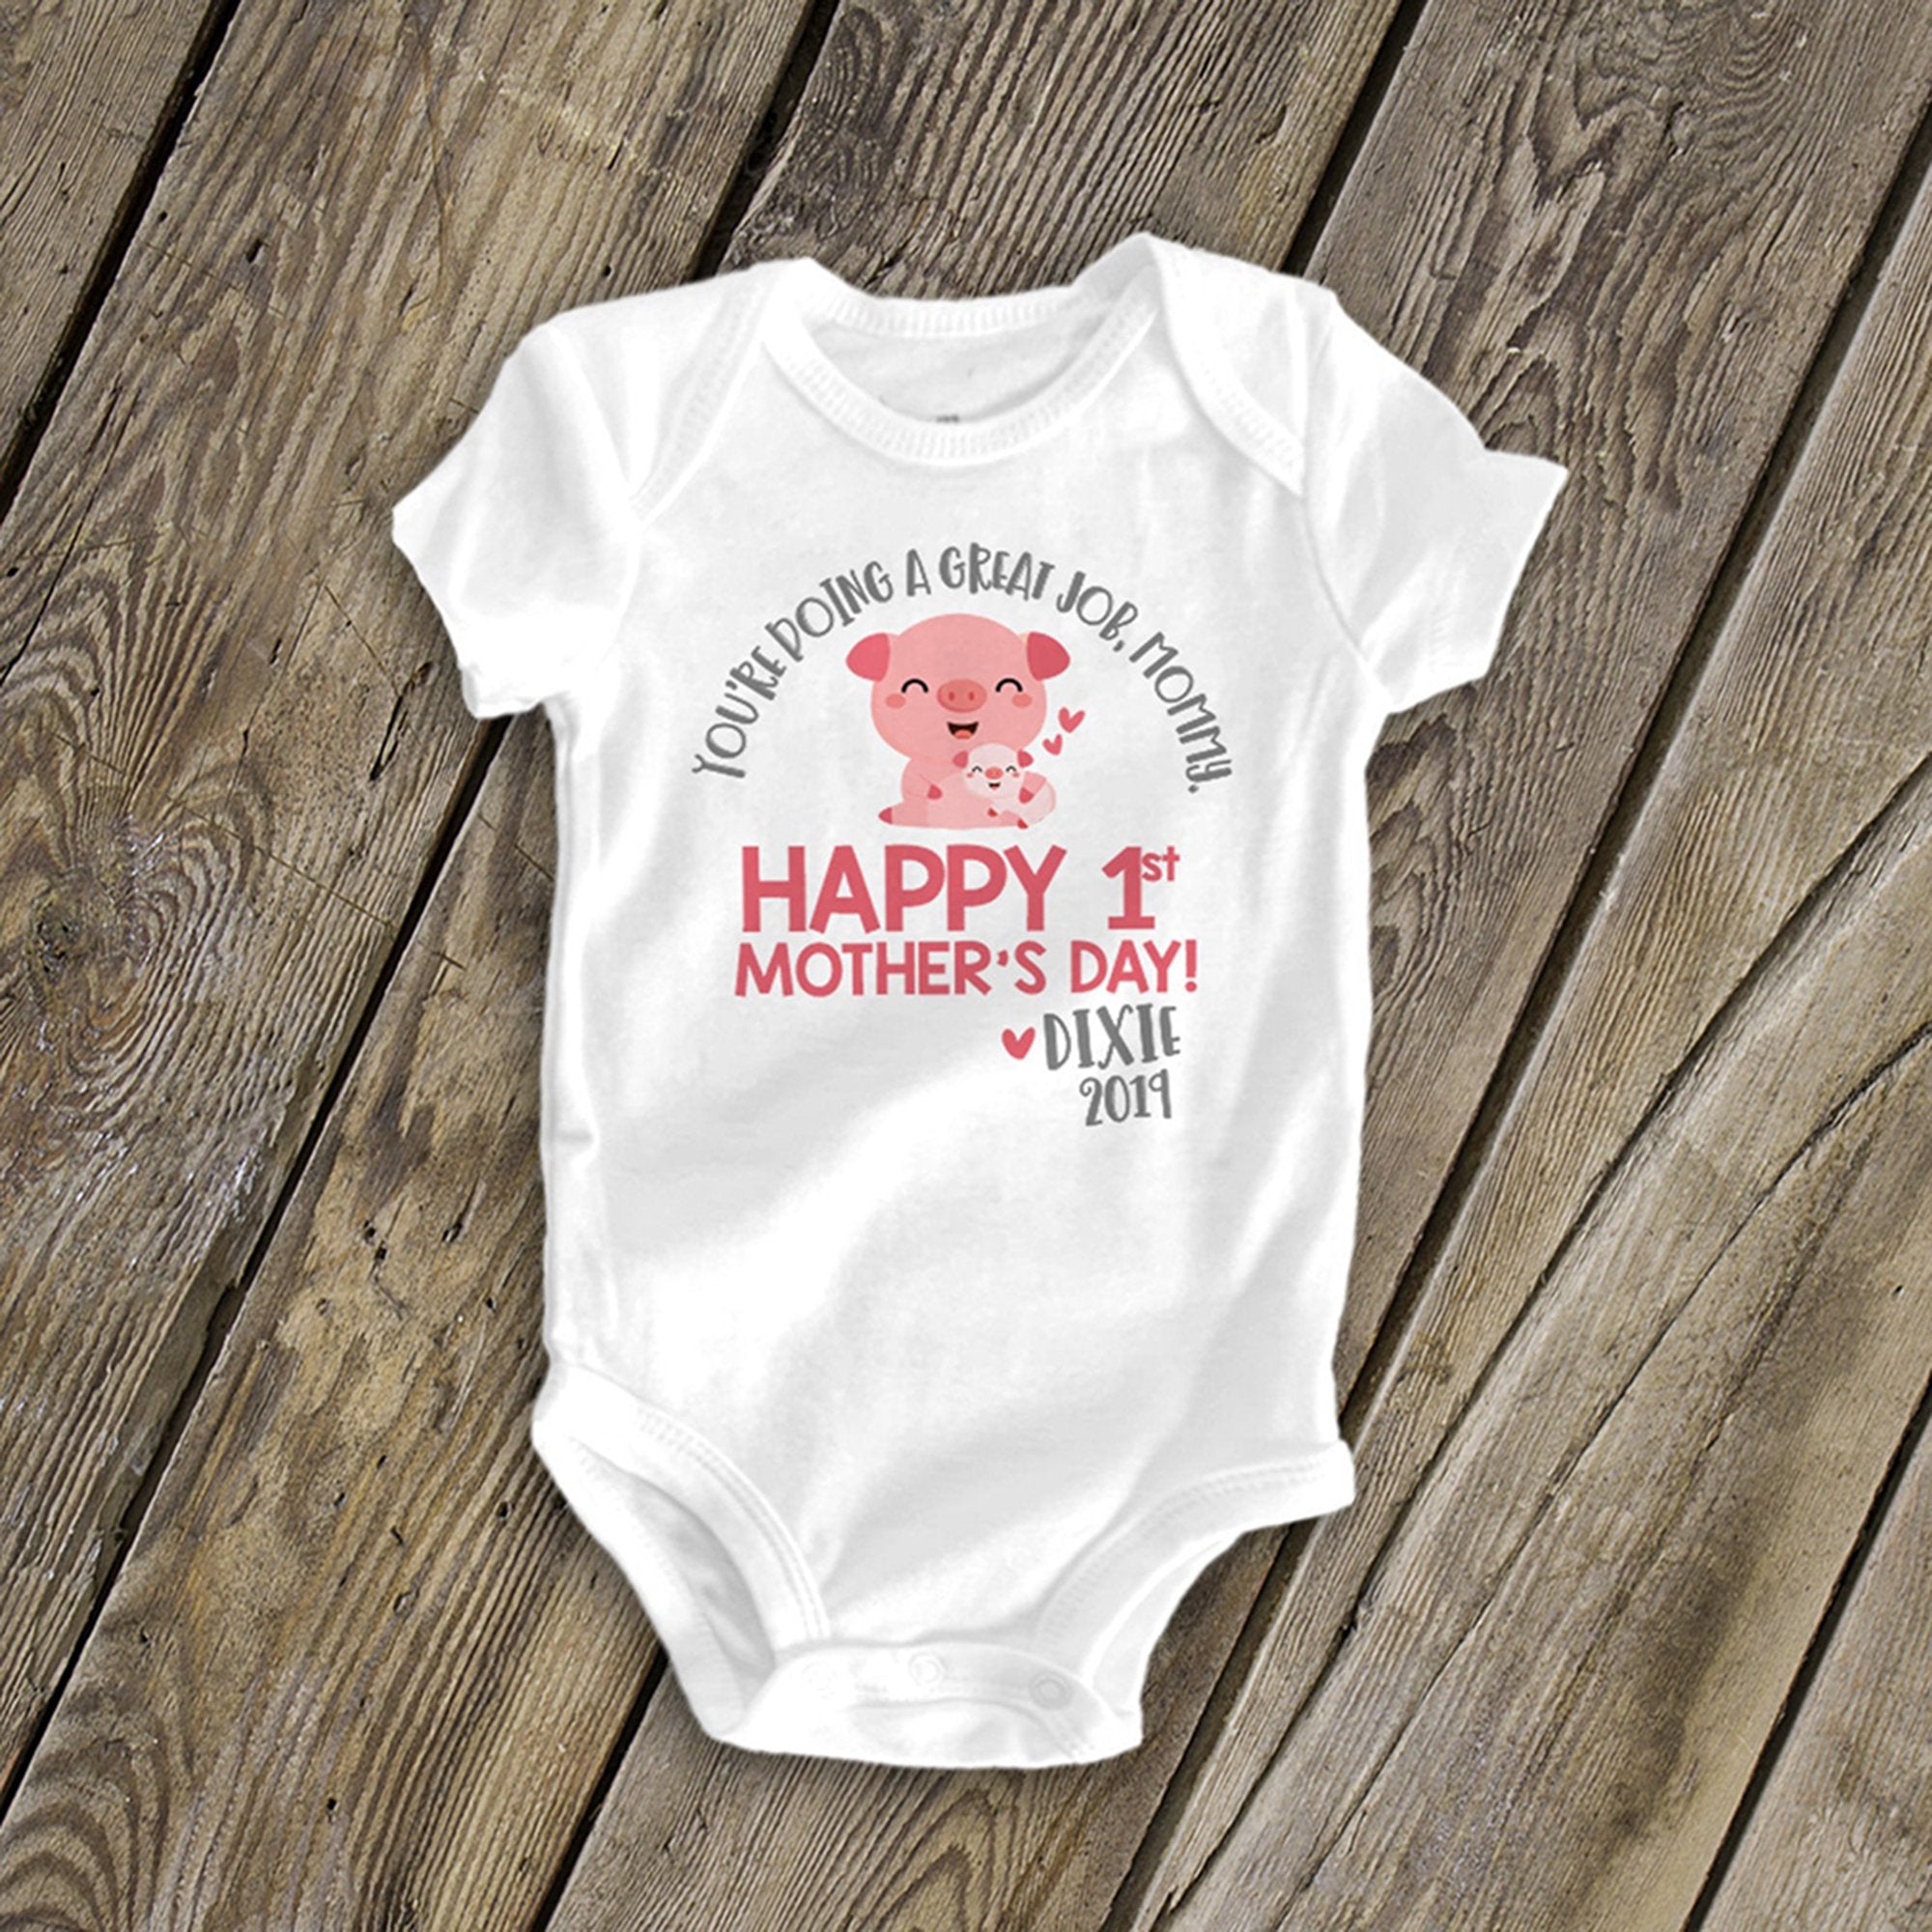 Citybarks [Baby Onesie] Gifts For Mom to be, Personalized Our First Mothers Day Pig Shirts HM439